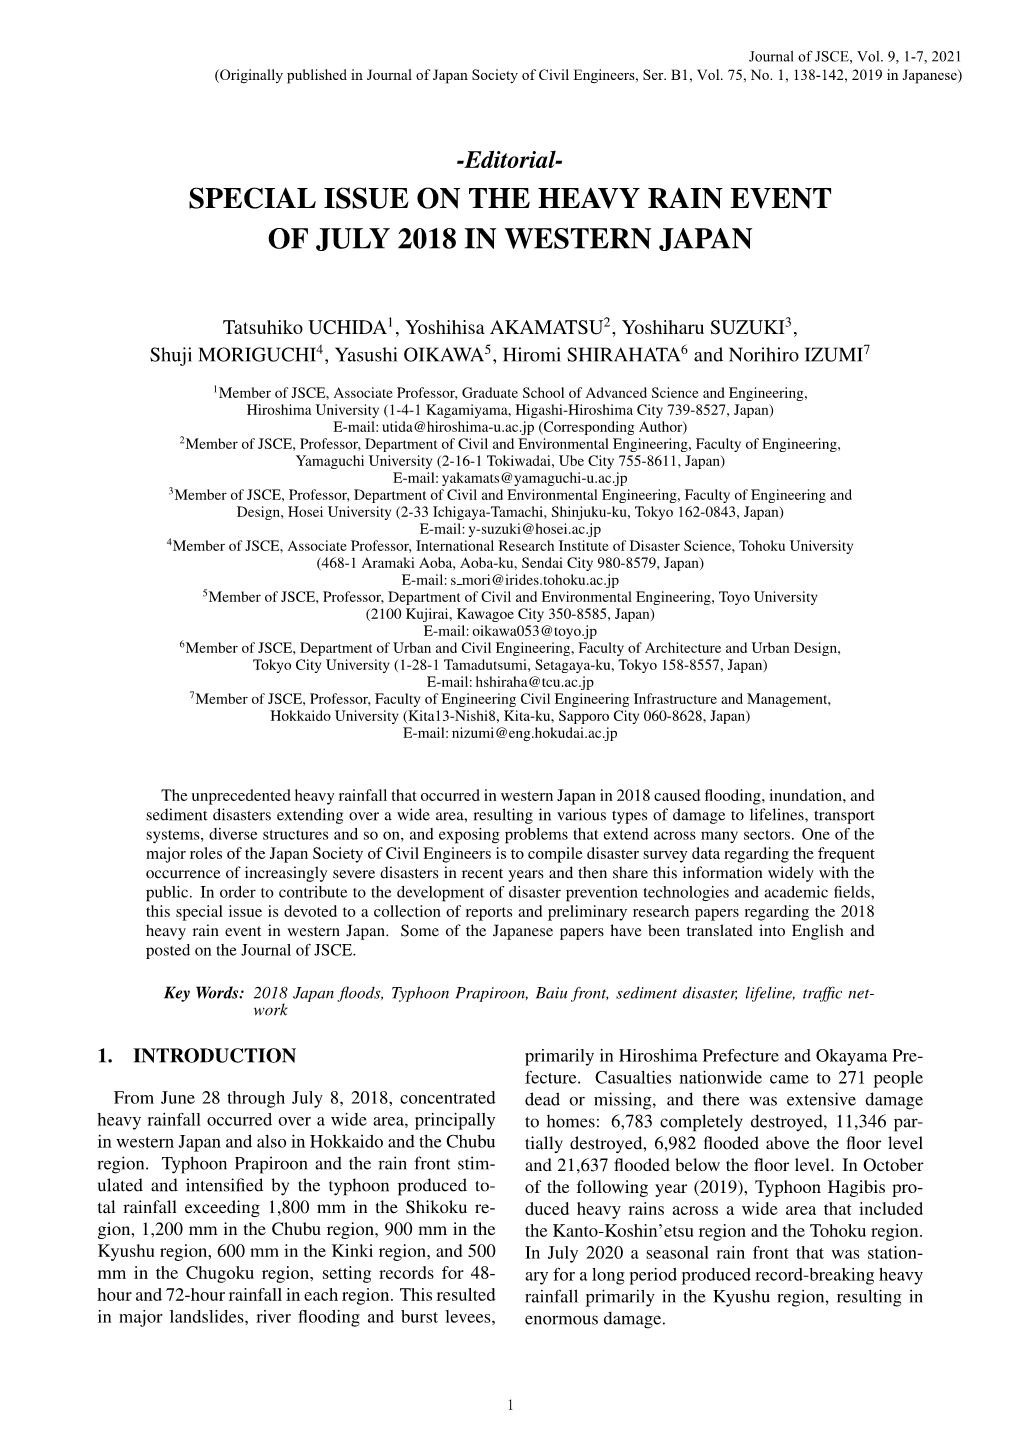 Special Issue on the Heavy Rain Event of July 2018 in Western Japan